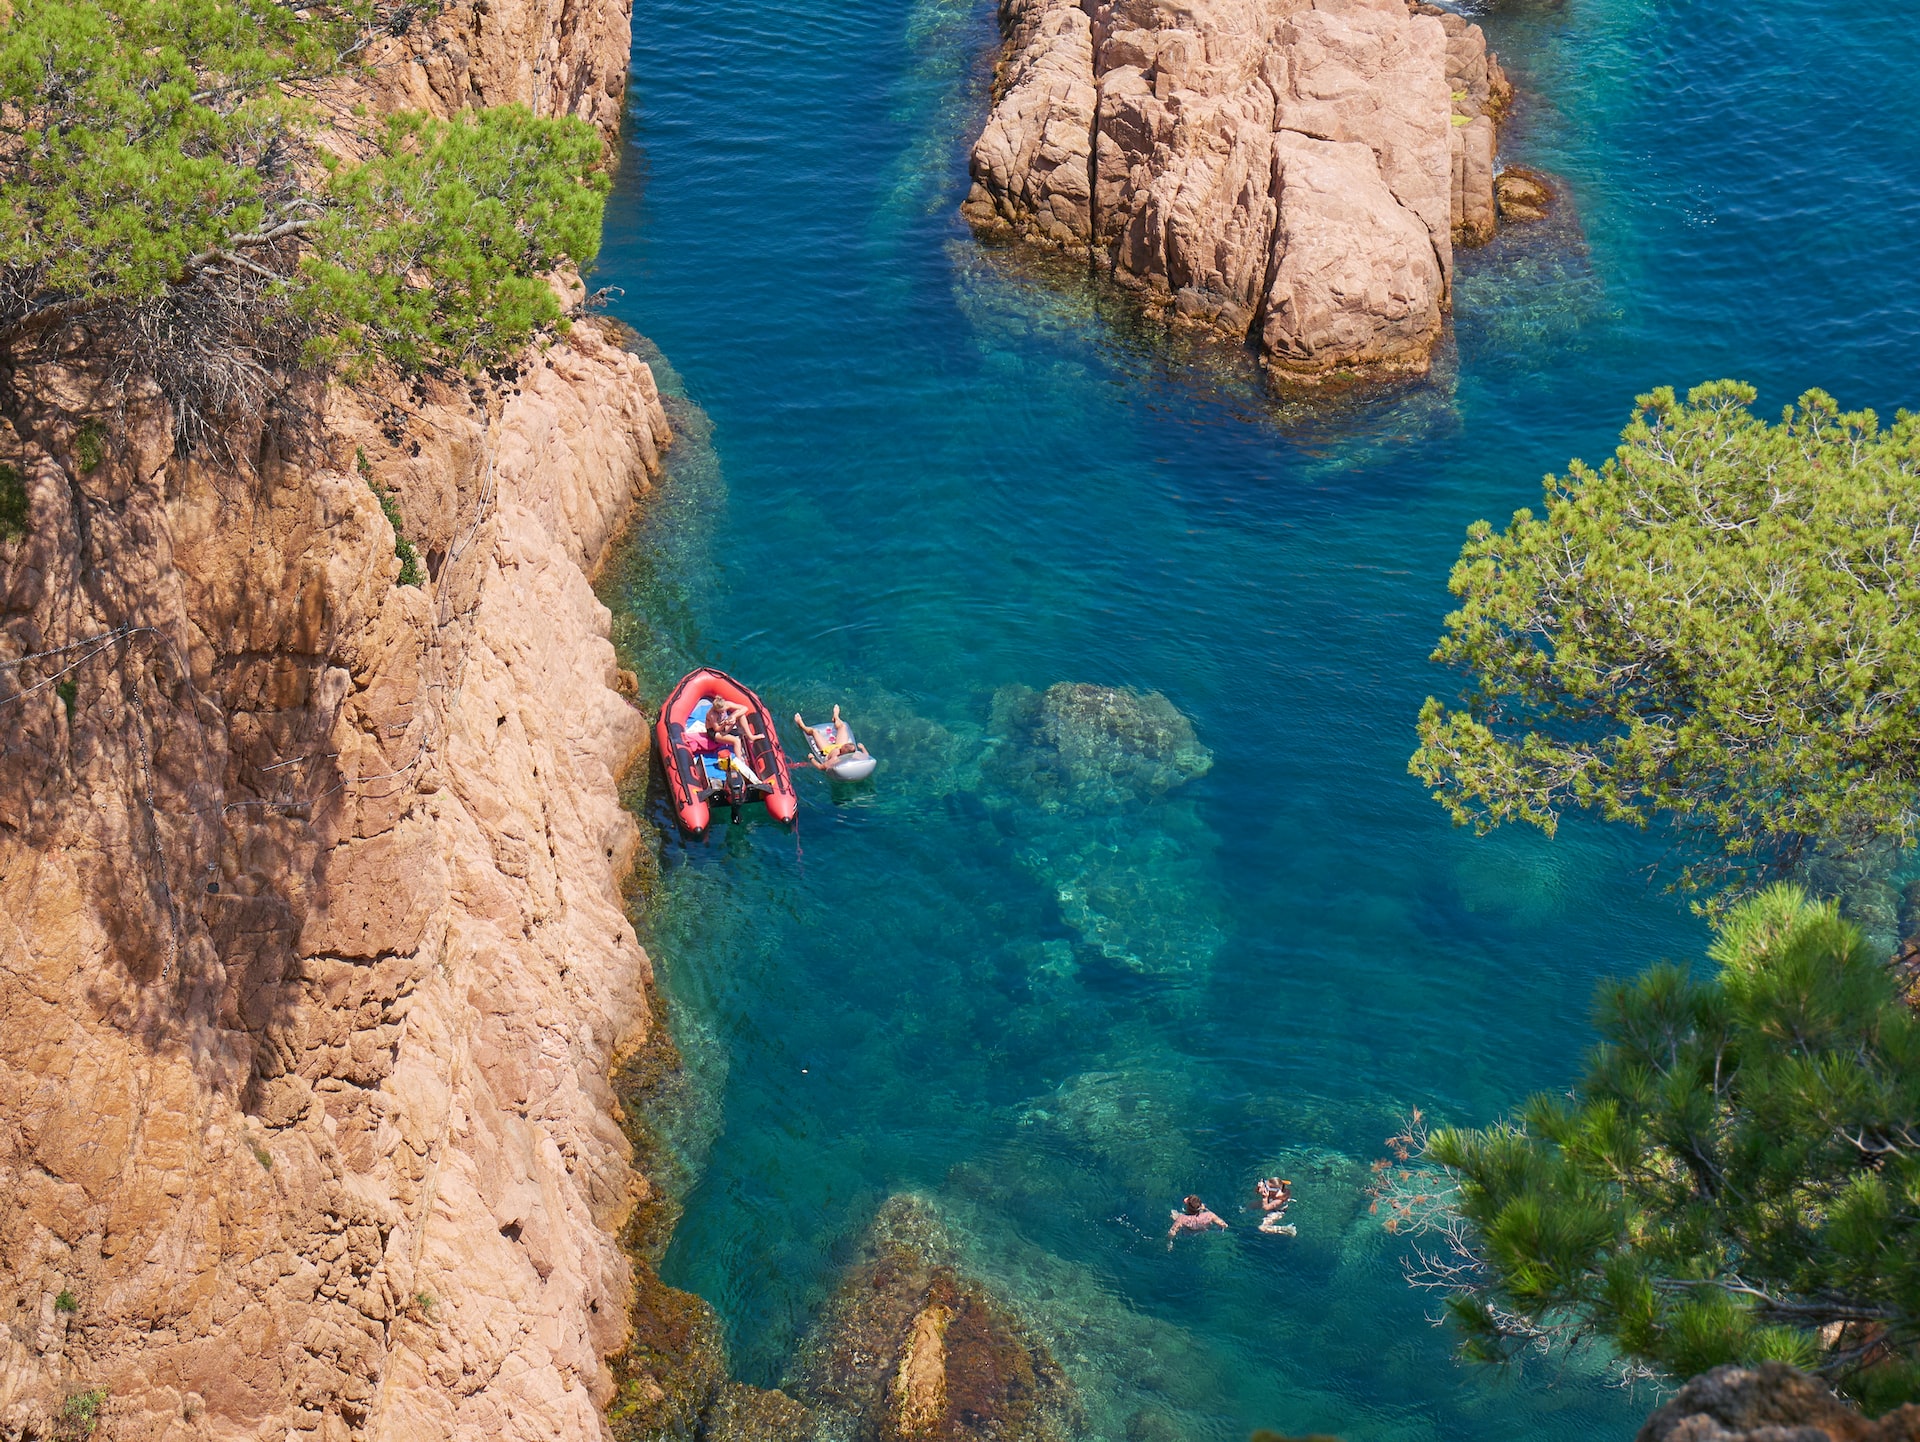 Best places to scuba dive and snorkel near Barcelona - image 1